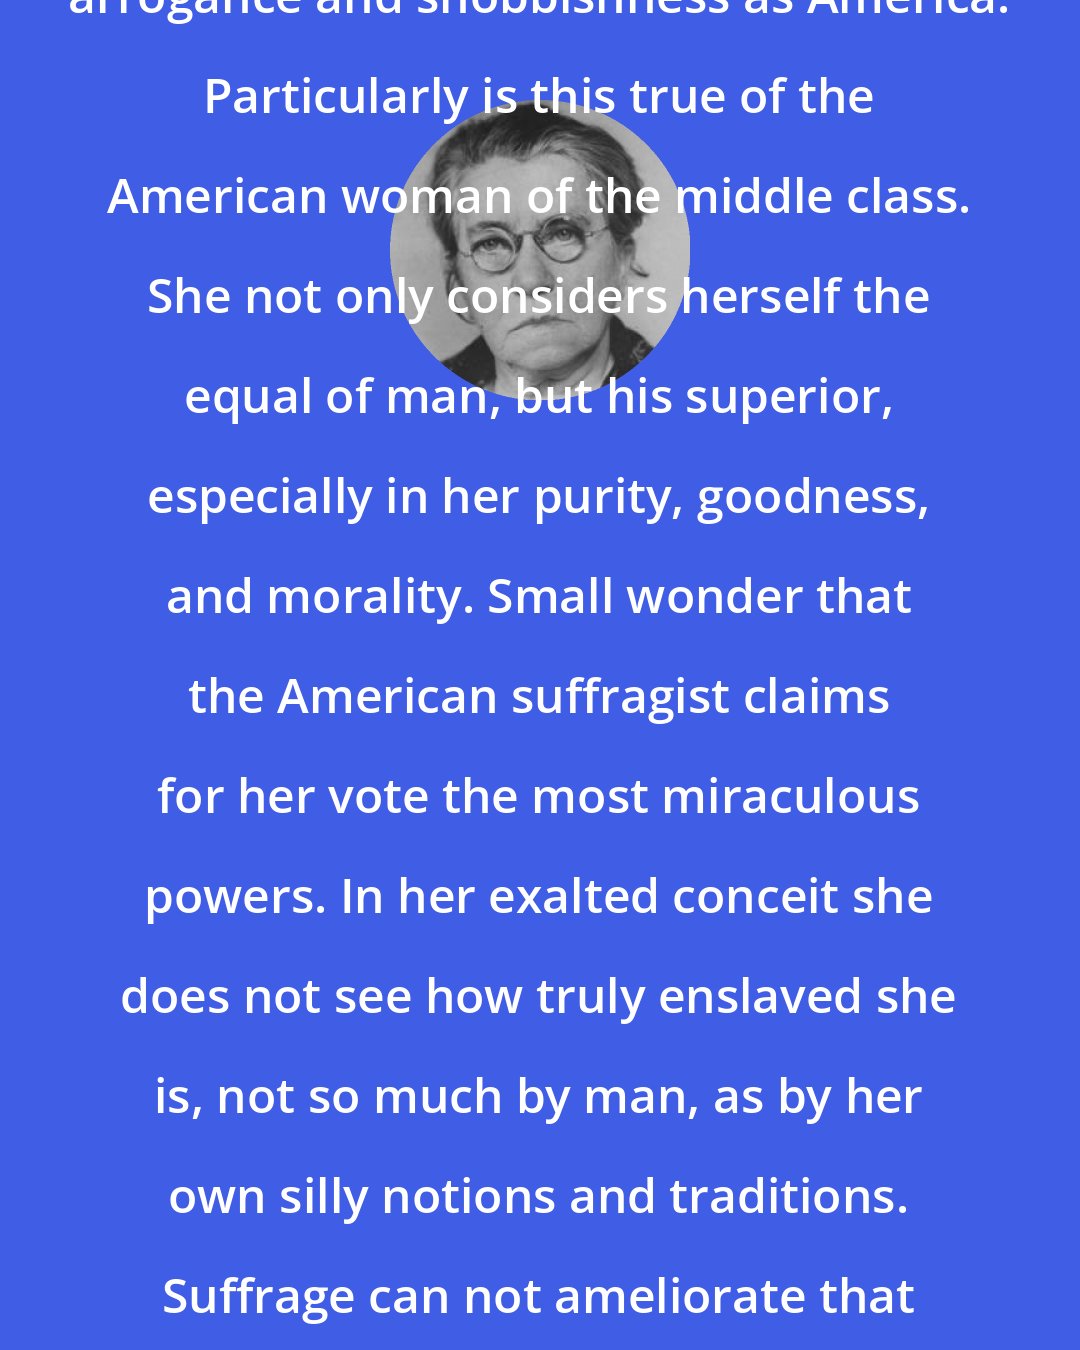 Emma Goldman: Few countries have produced such arrogance and snobbishness as America. Particularly is this true of the American woman of the middle class. She not only considers herself the equal of man, but his superior, especially in her purity, goodness, and morality. Small wonder that the American suffragist claims for her vote the most miraculous powers. In her exalted conceit she does not see how truly enslaved she is, not so much by man, as by her own silly notions and traditions. Suffrage can not ameliorate that sad fact; it can only accentuate it, as indeed it does.